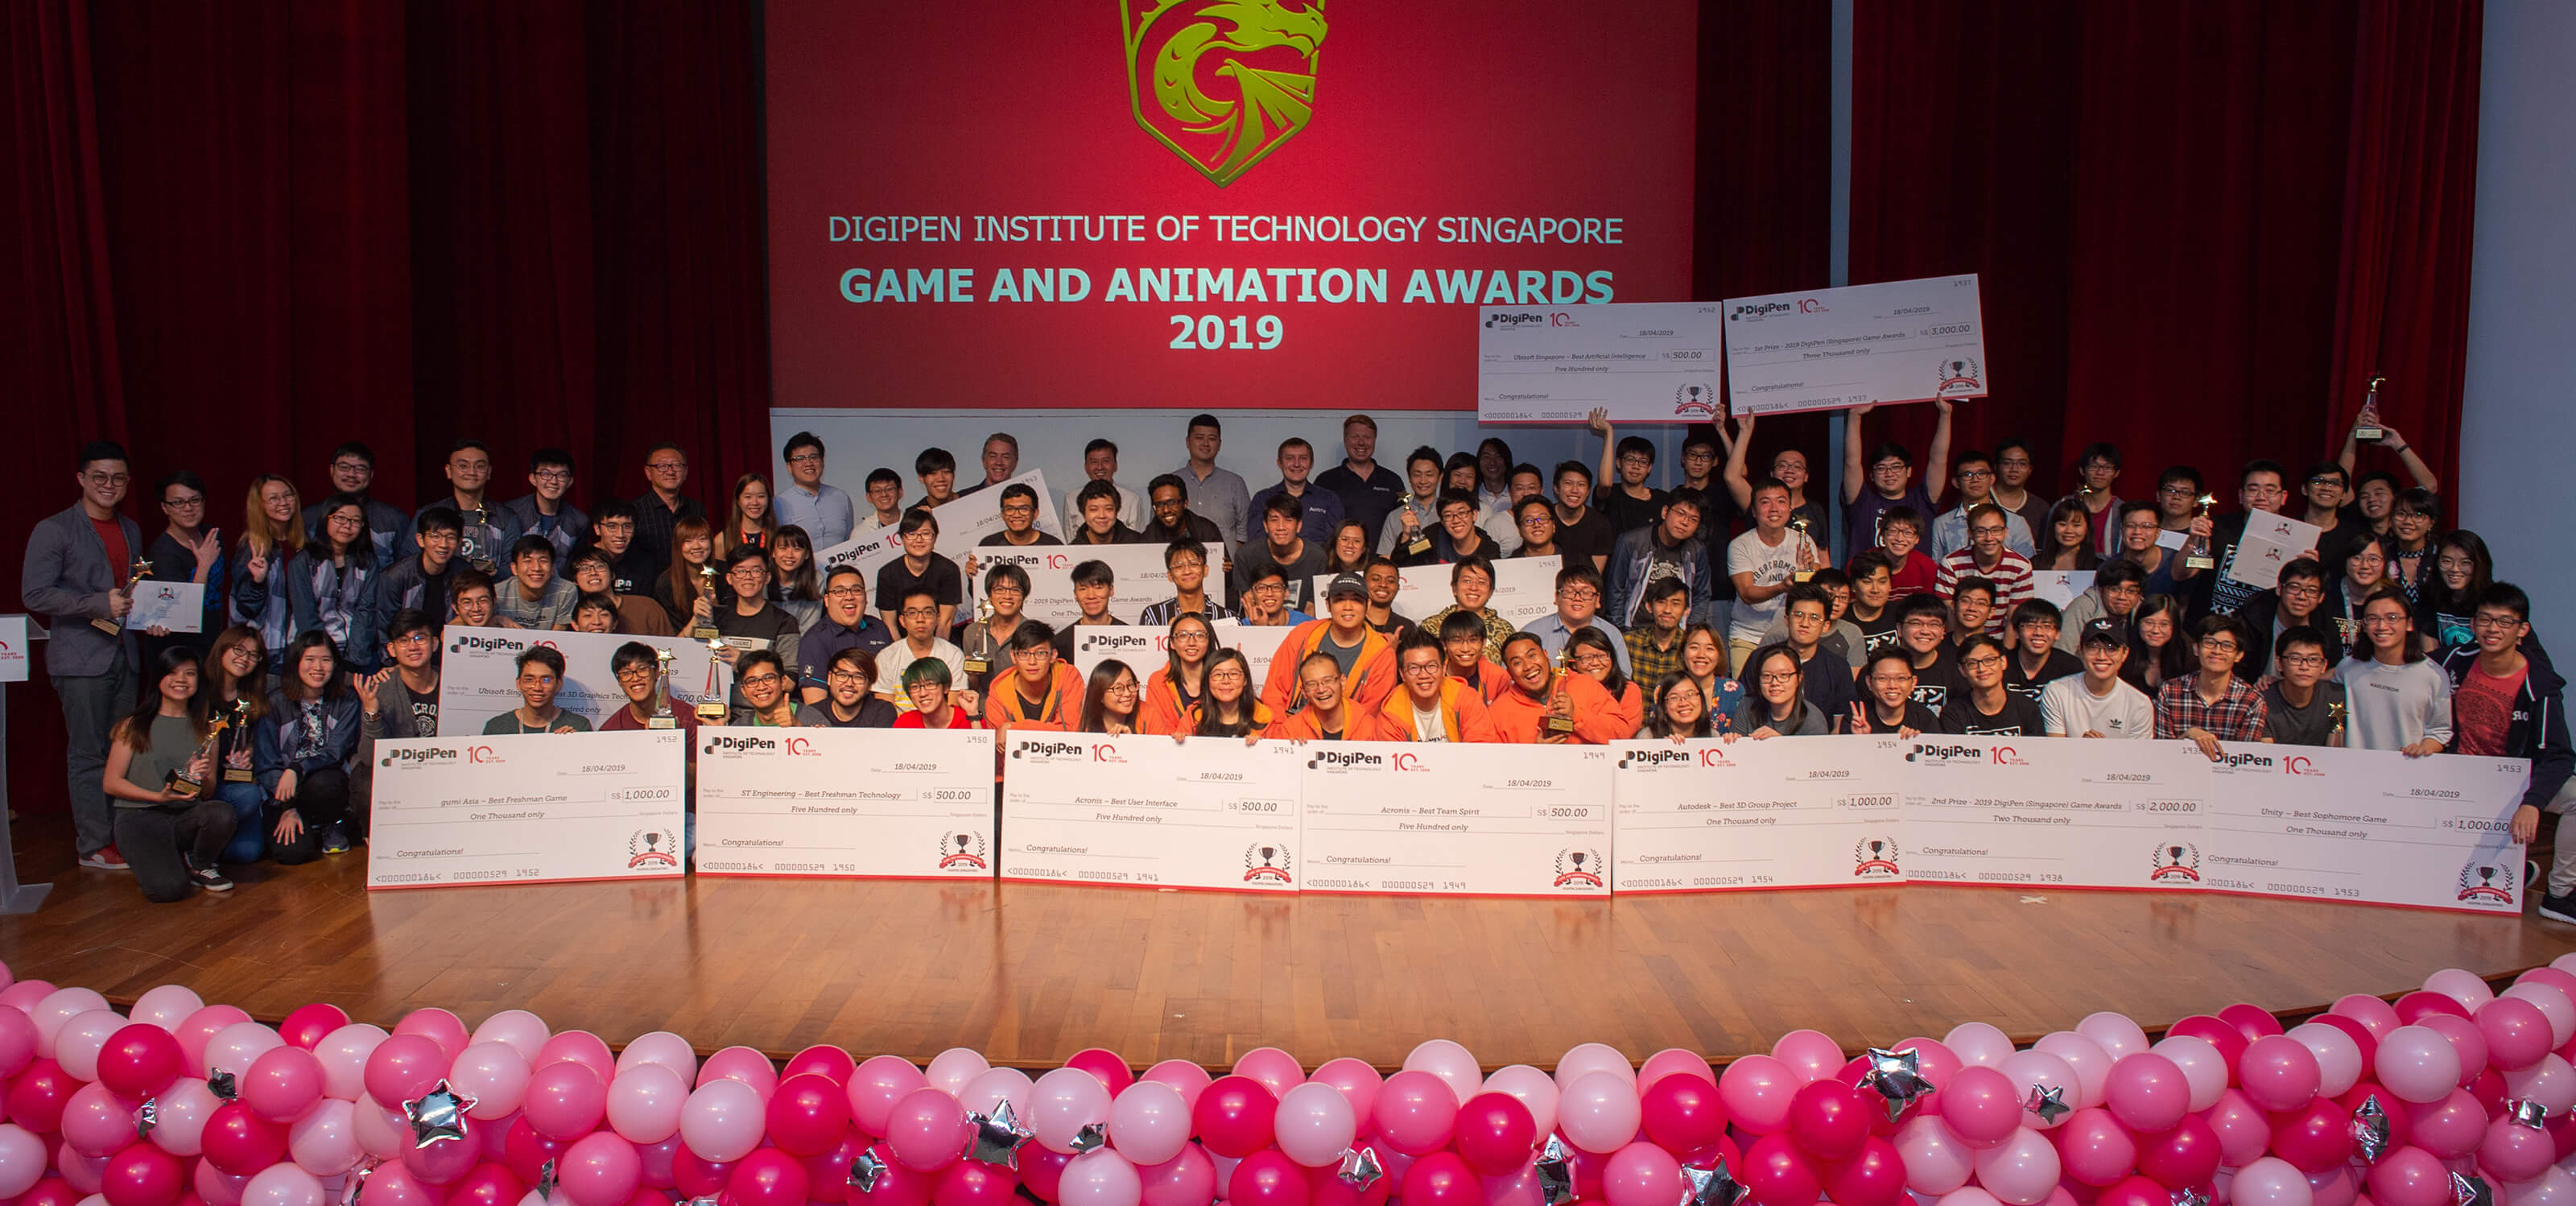 Four rows of students line up on stage to display their giant prize checks during the 2019 DigiPen Game and Animation Awards ceremony.